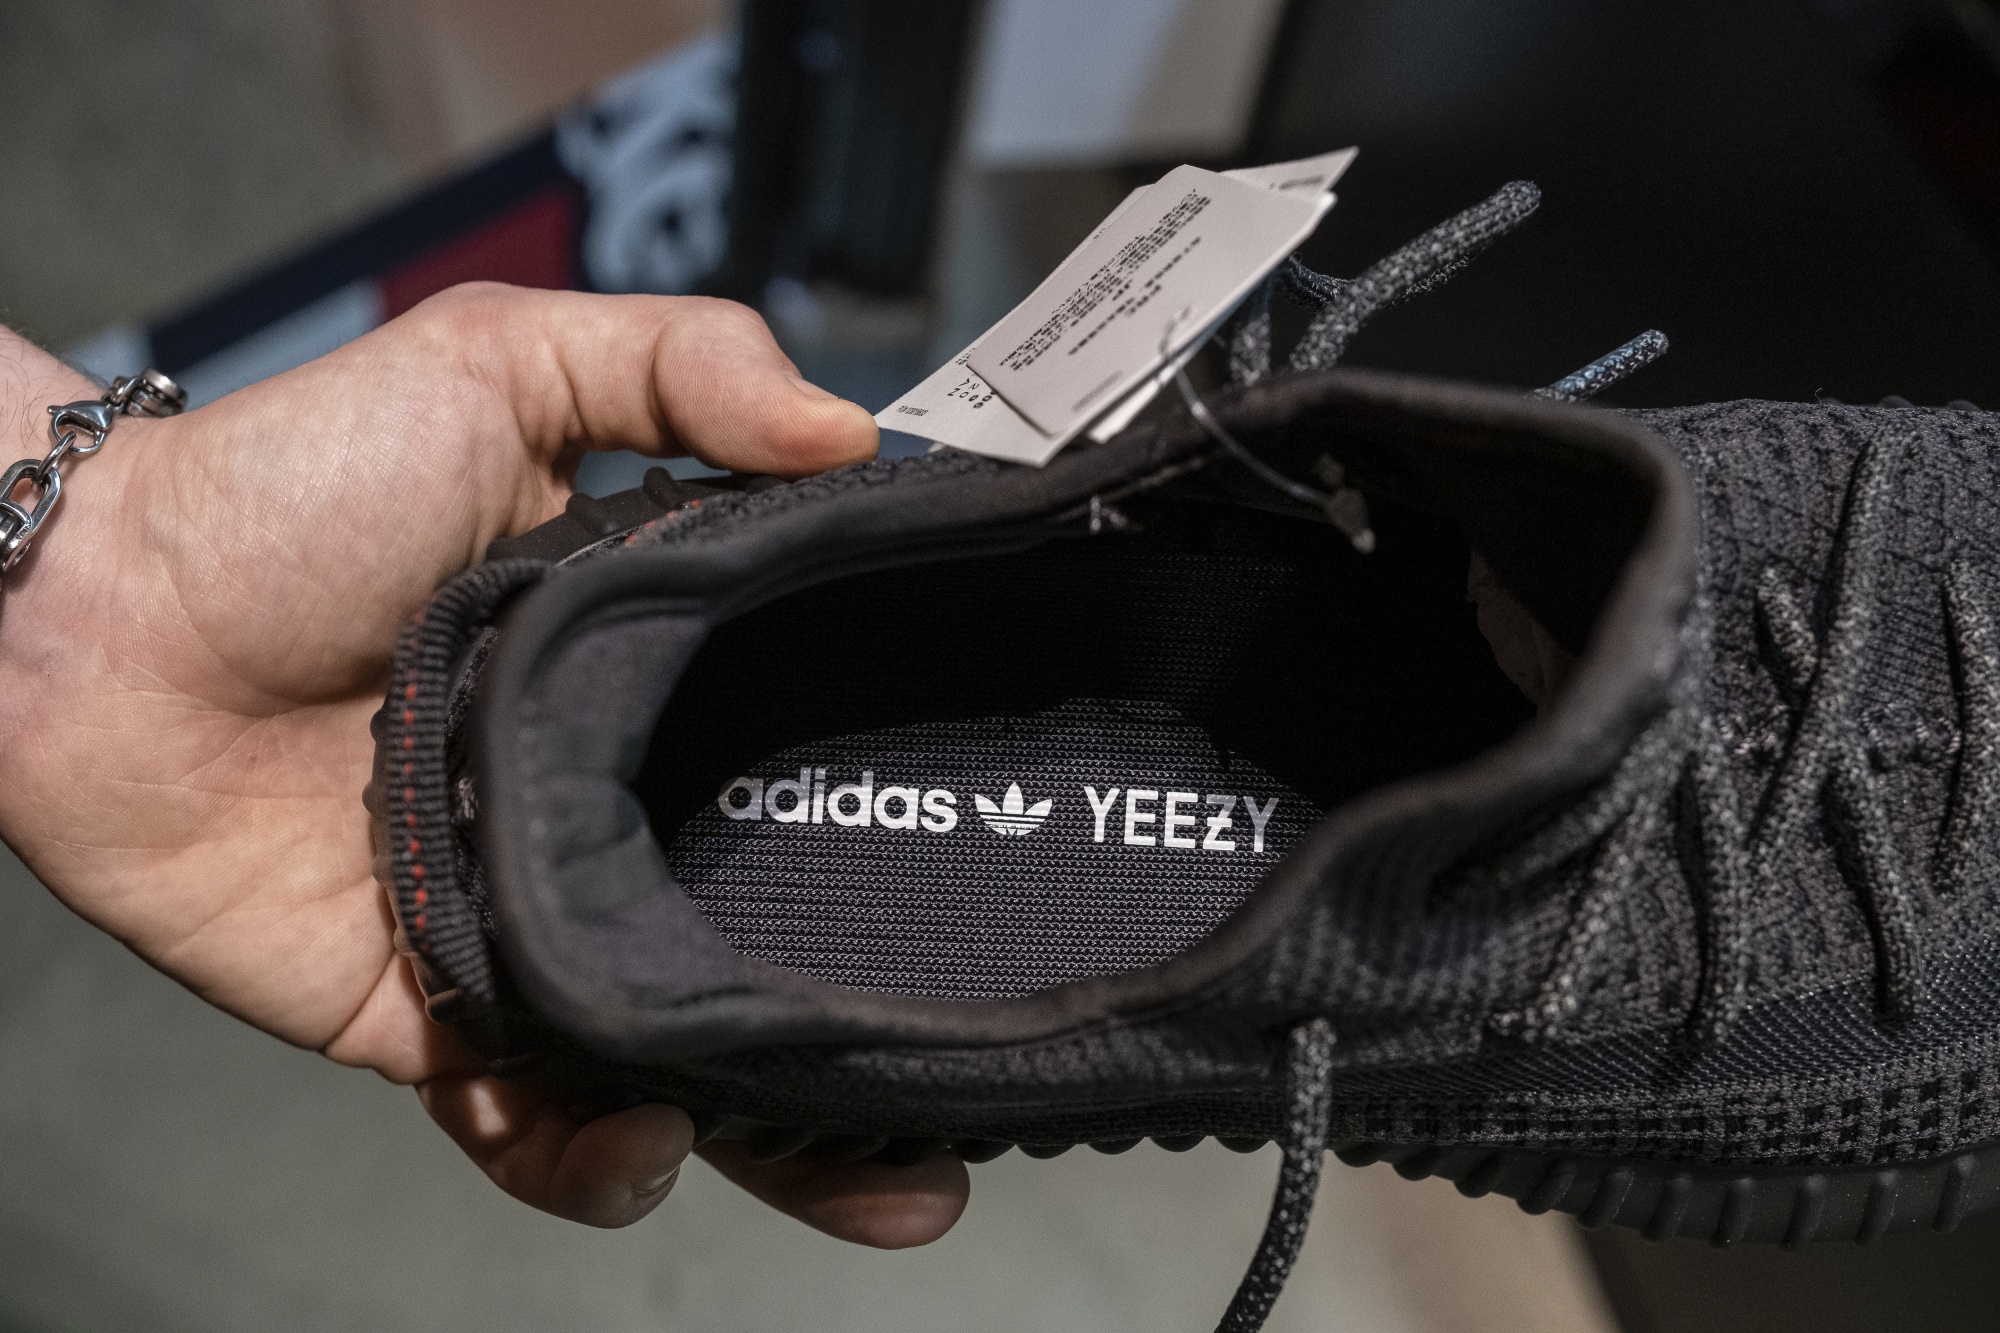 The insole of an Adidas Yeezy shoe.&nbsp;